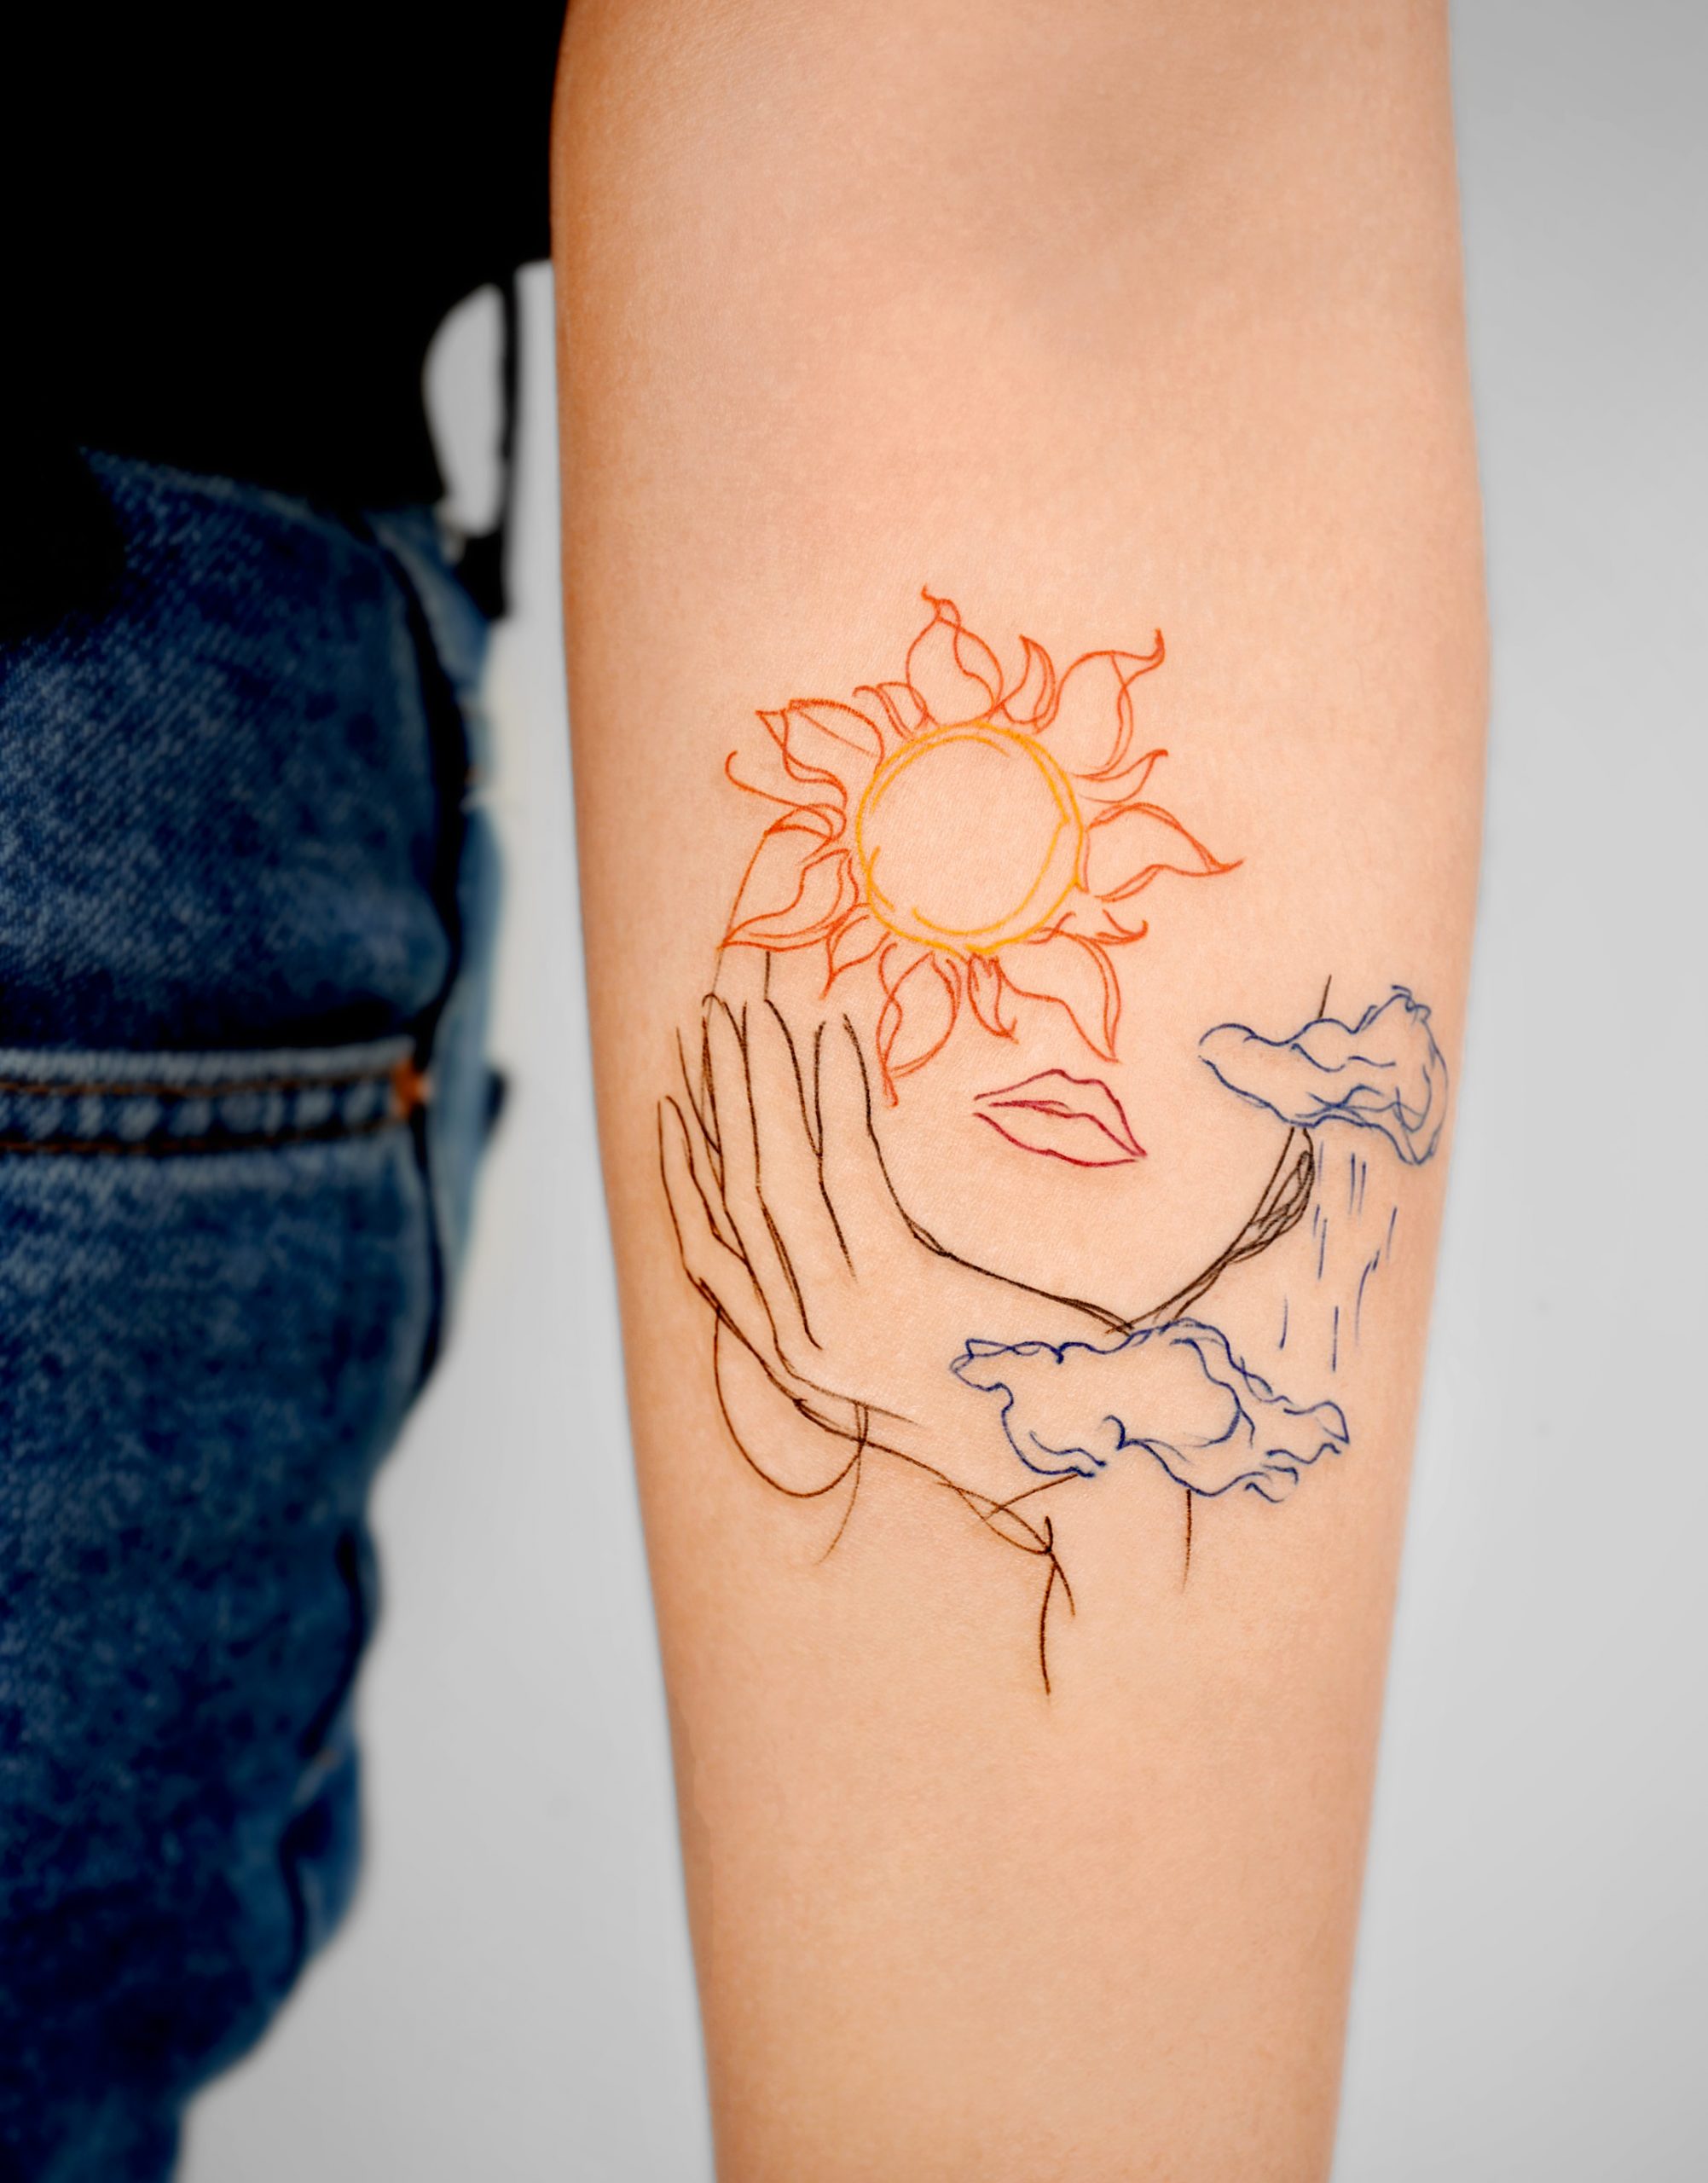 Fine line tattoo – Things&Ink